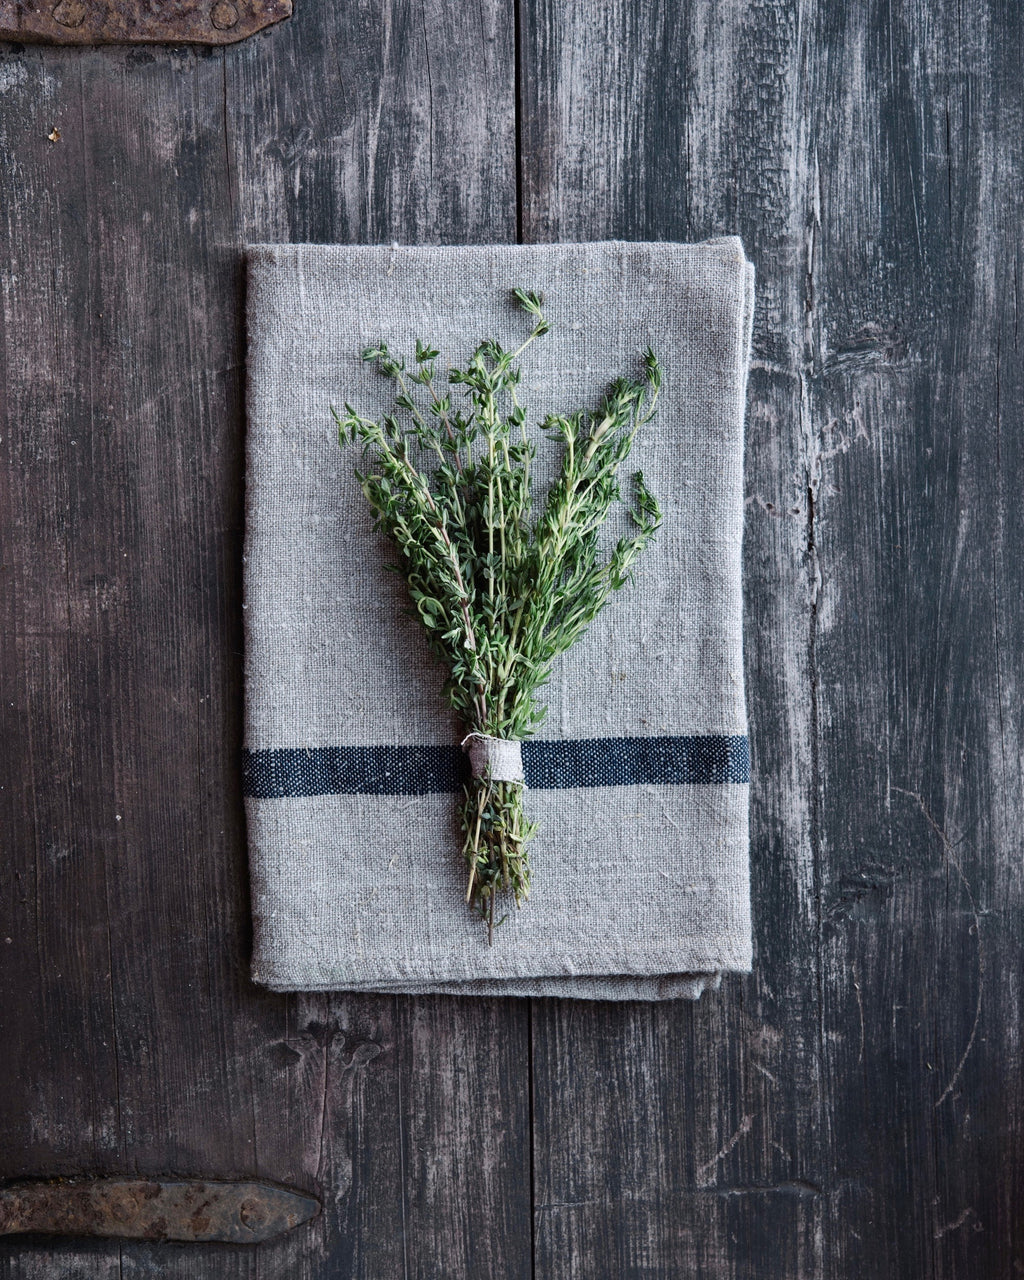 Thick Linen Kitchen Cloth: Natural with Navy Stripe